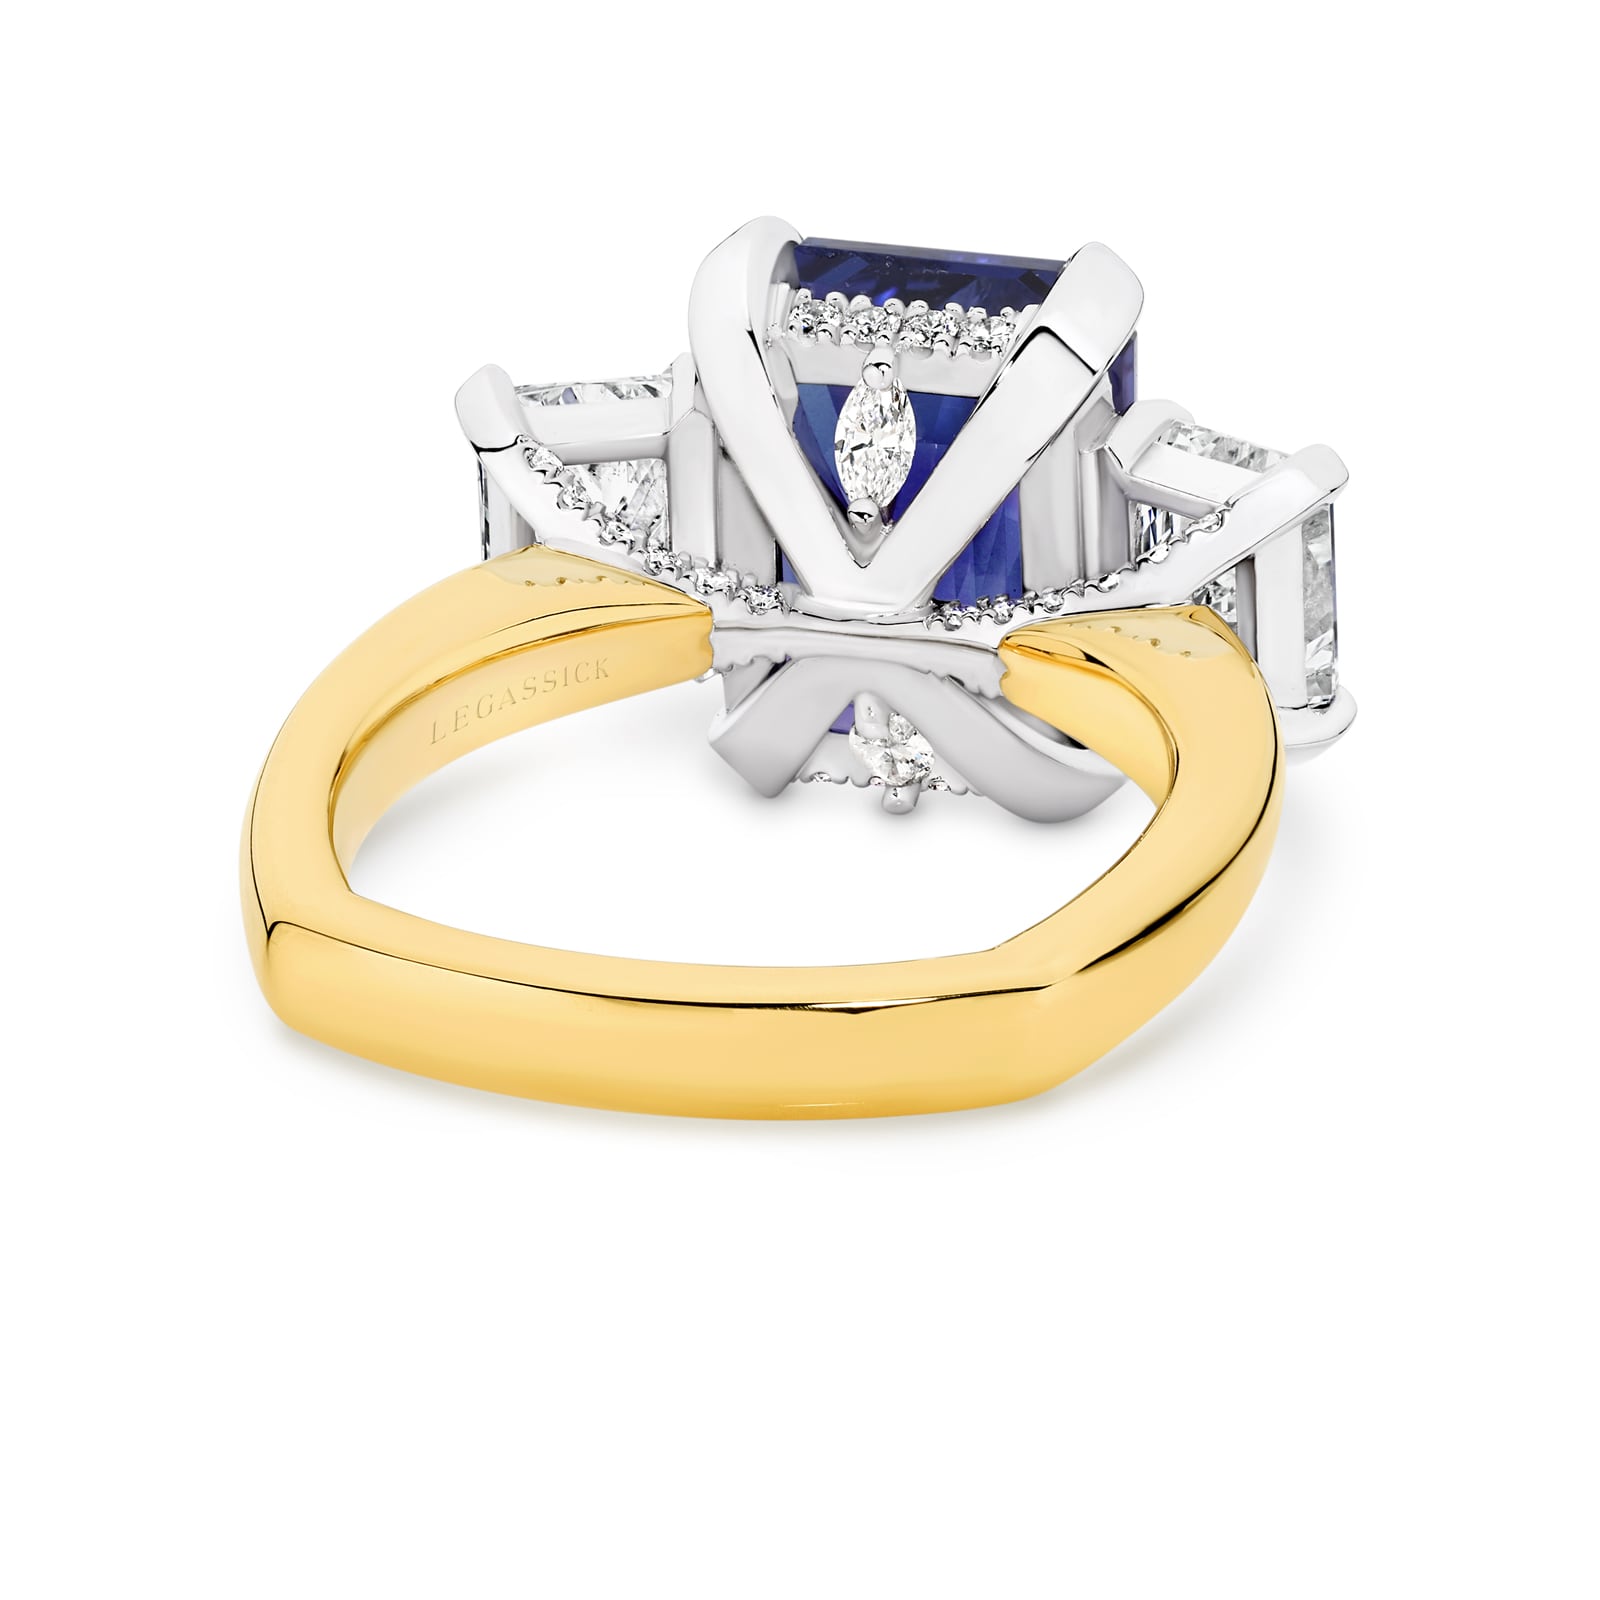 Layla is a 7.43ct emerald cut natural tanzanite and diamond ring. She was designed and handcrafted by LeGassick's Master Jewellers, Gold Coast, Australia.